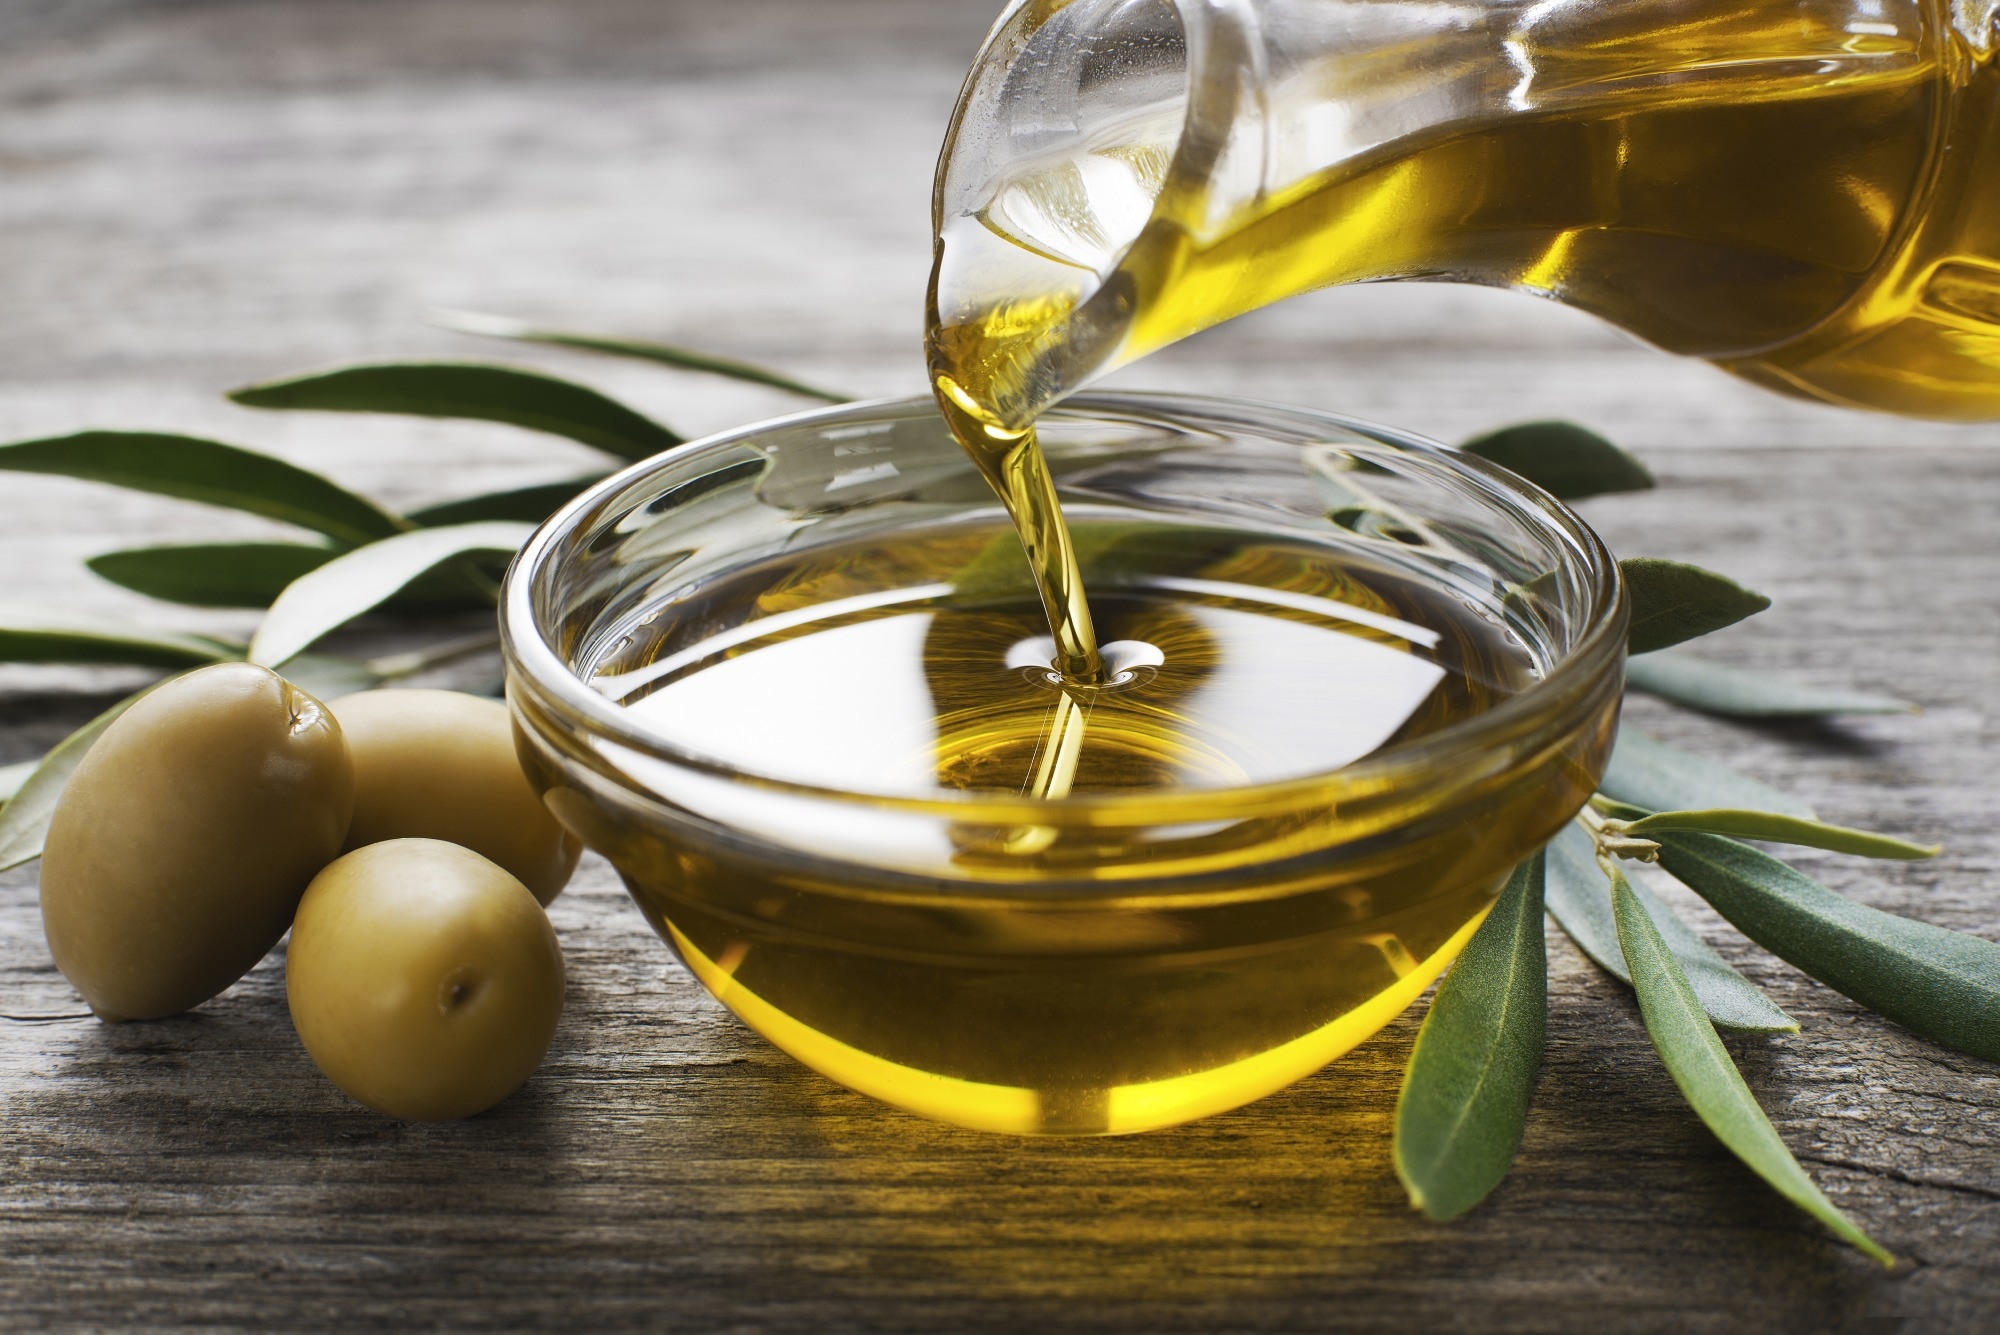 Study: The Benefits of Olive Oil for Skin Health: Study on the Effect of Hydroxytyrosol, Tyrosol, and Oleocanthal on Human Fibroblasts. Image Credit: DUSANZIDAR/Shutterstock.com